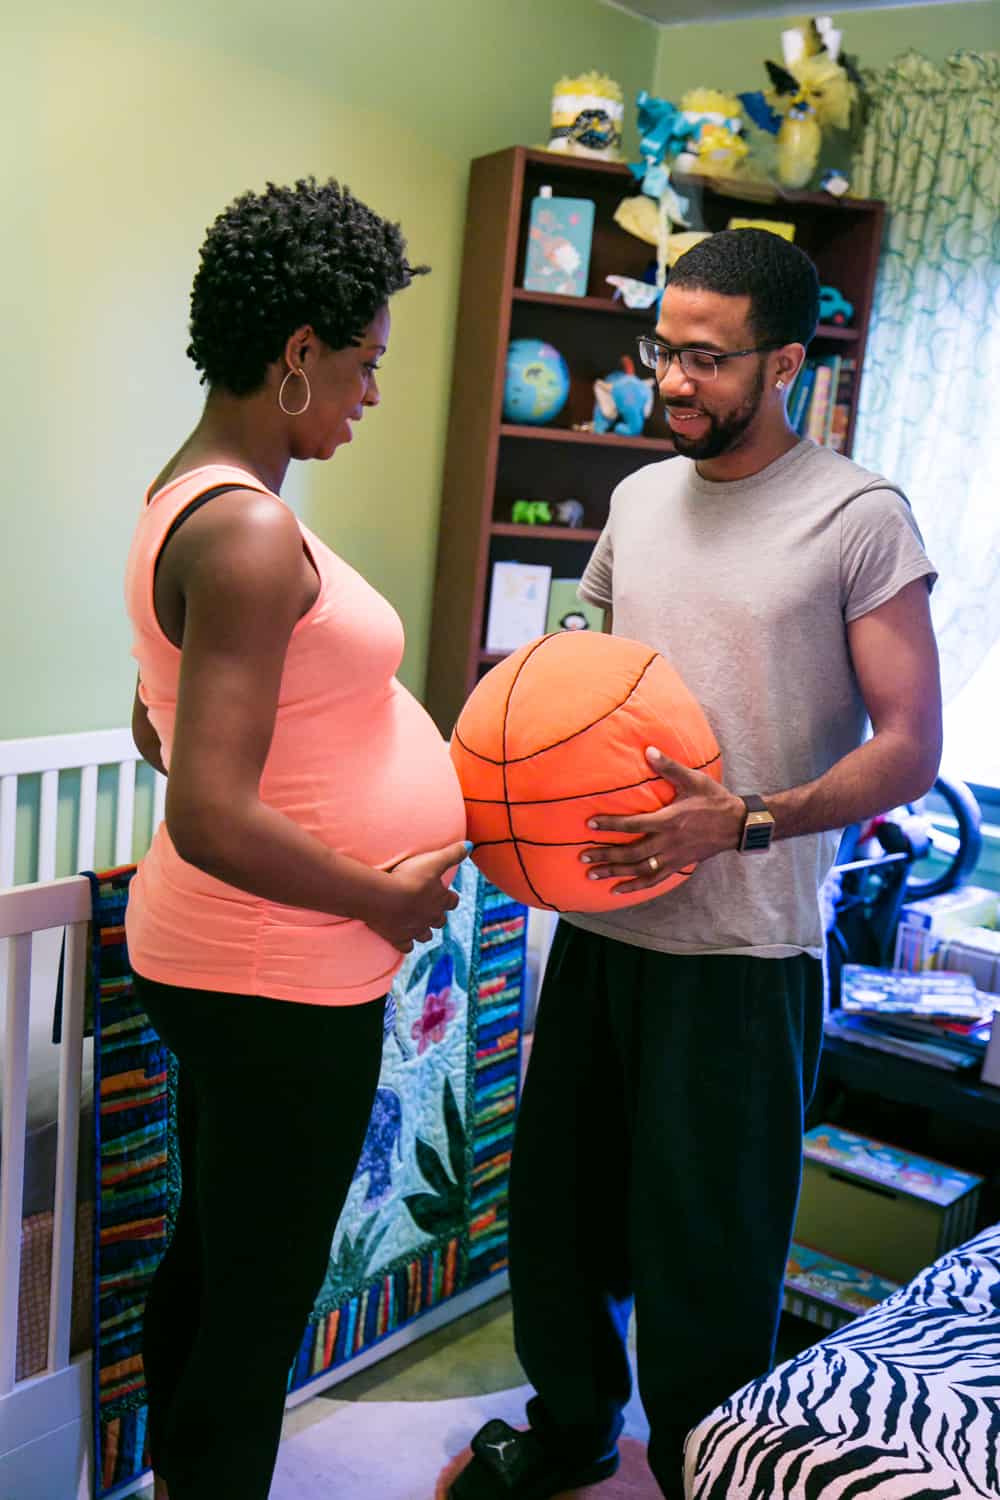 Parents-to-be comparing pregnant stomach to stuffed basketball by Queens maternity photographer